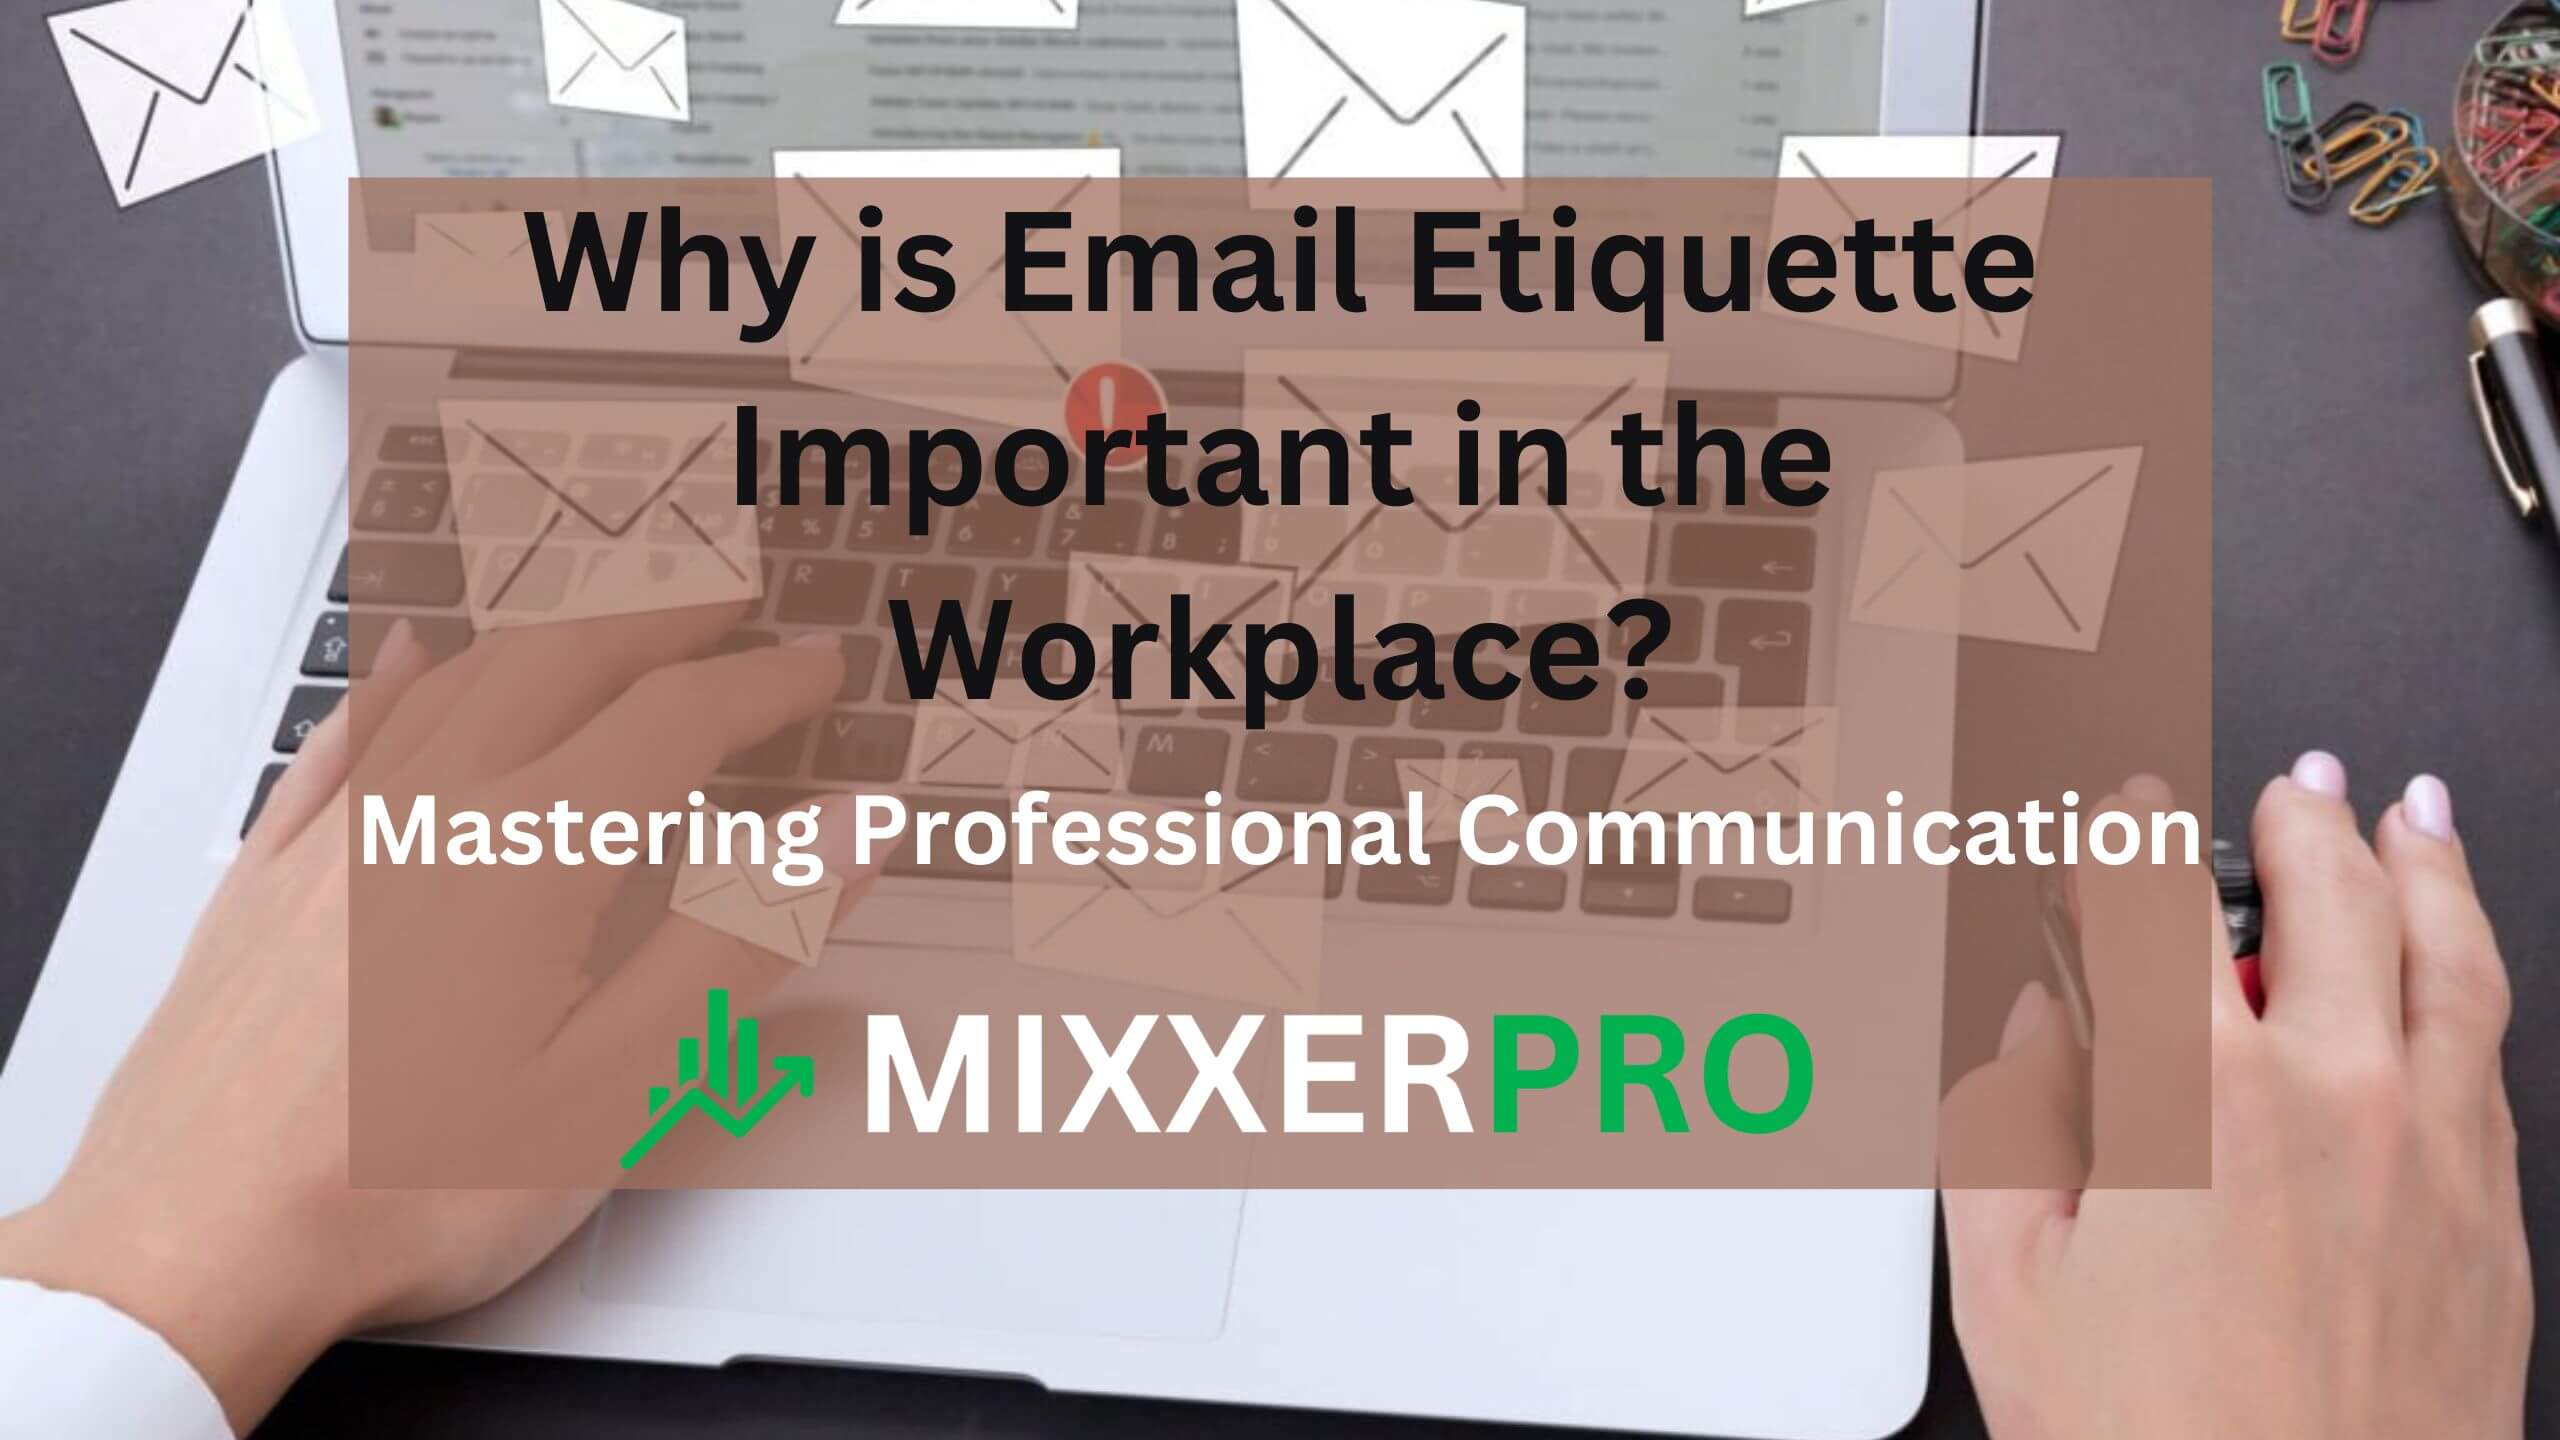 Why is Email Etiquette Important in the Workplace